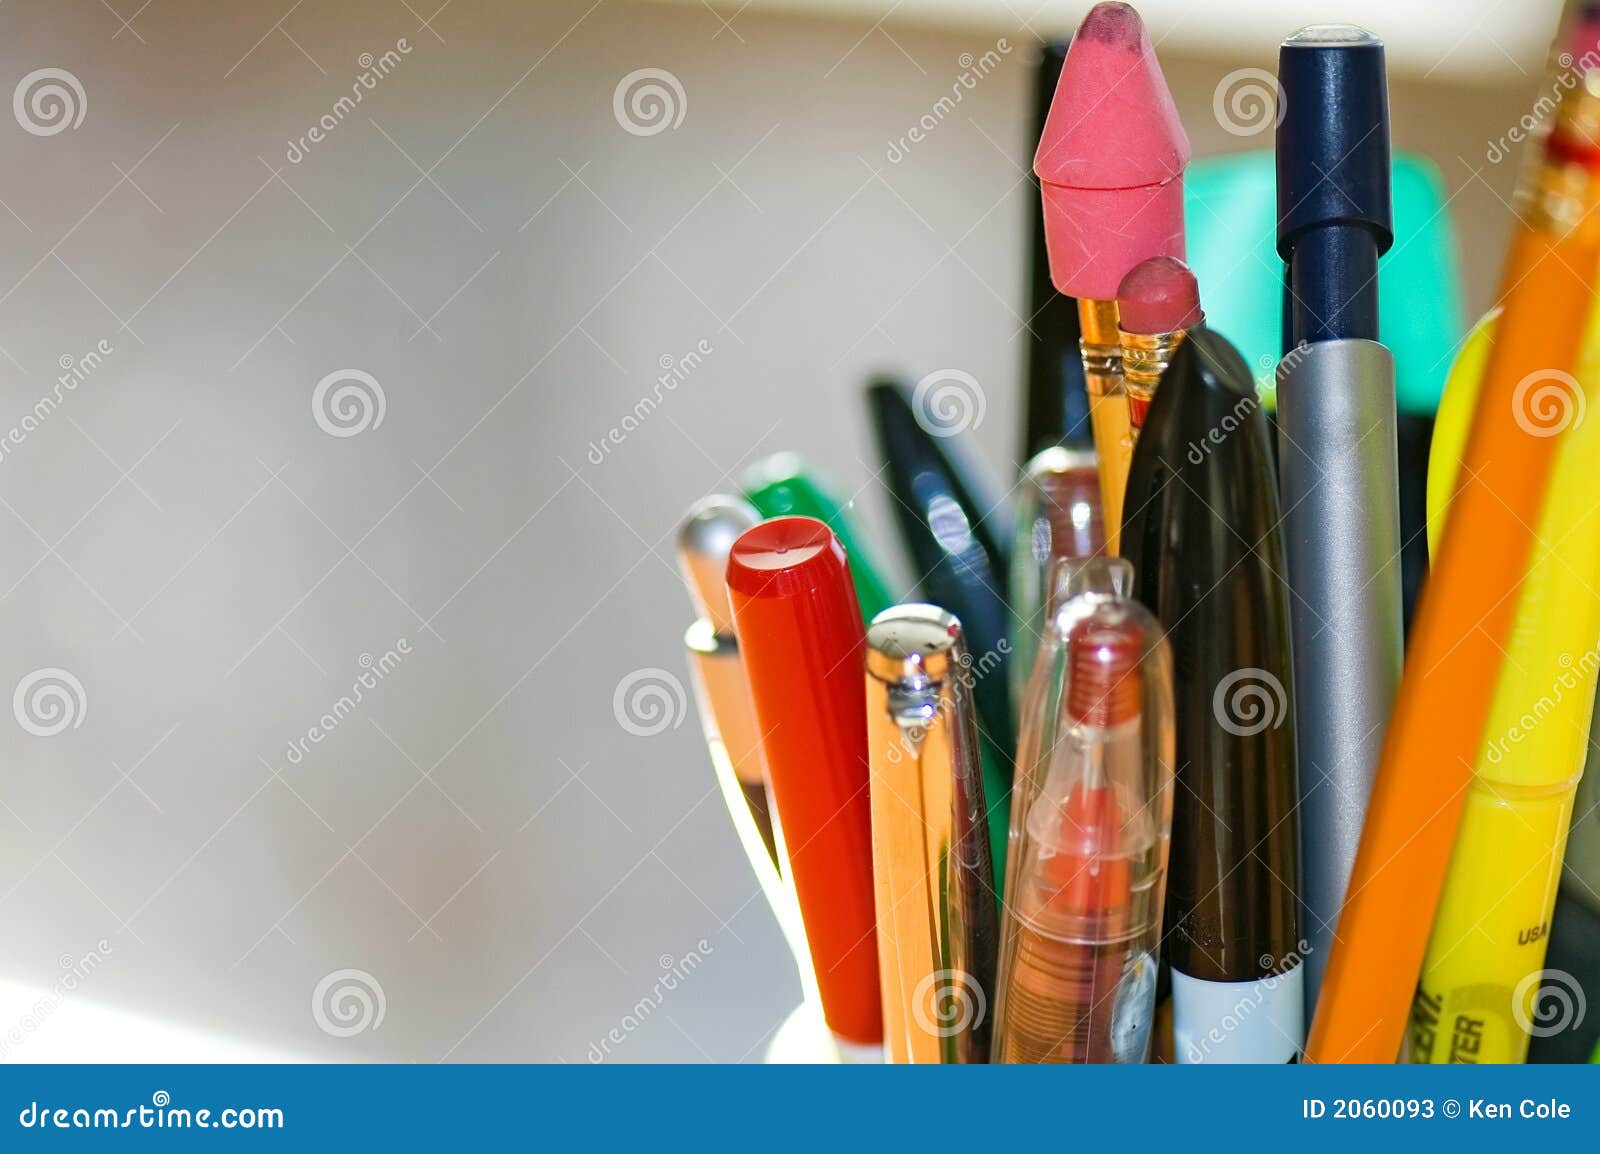 pens and pencils on desk